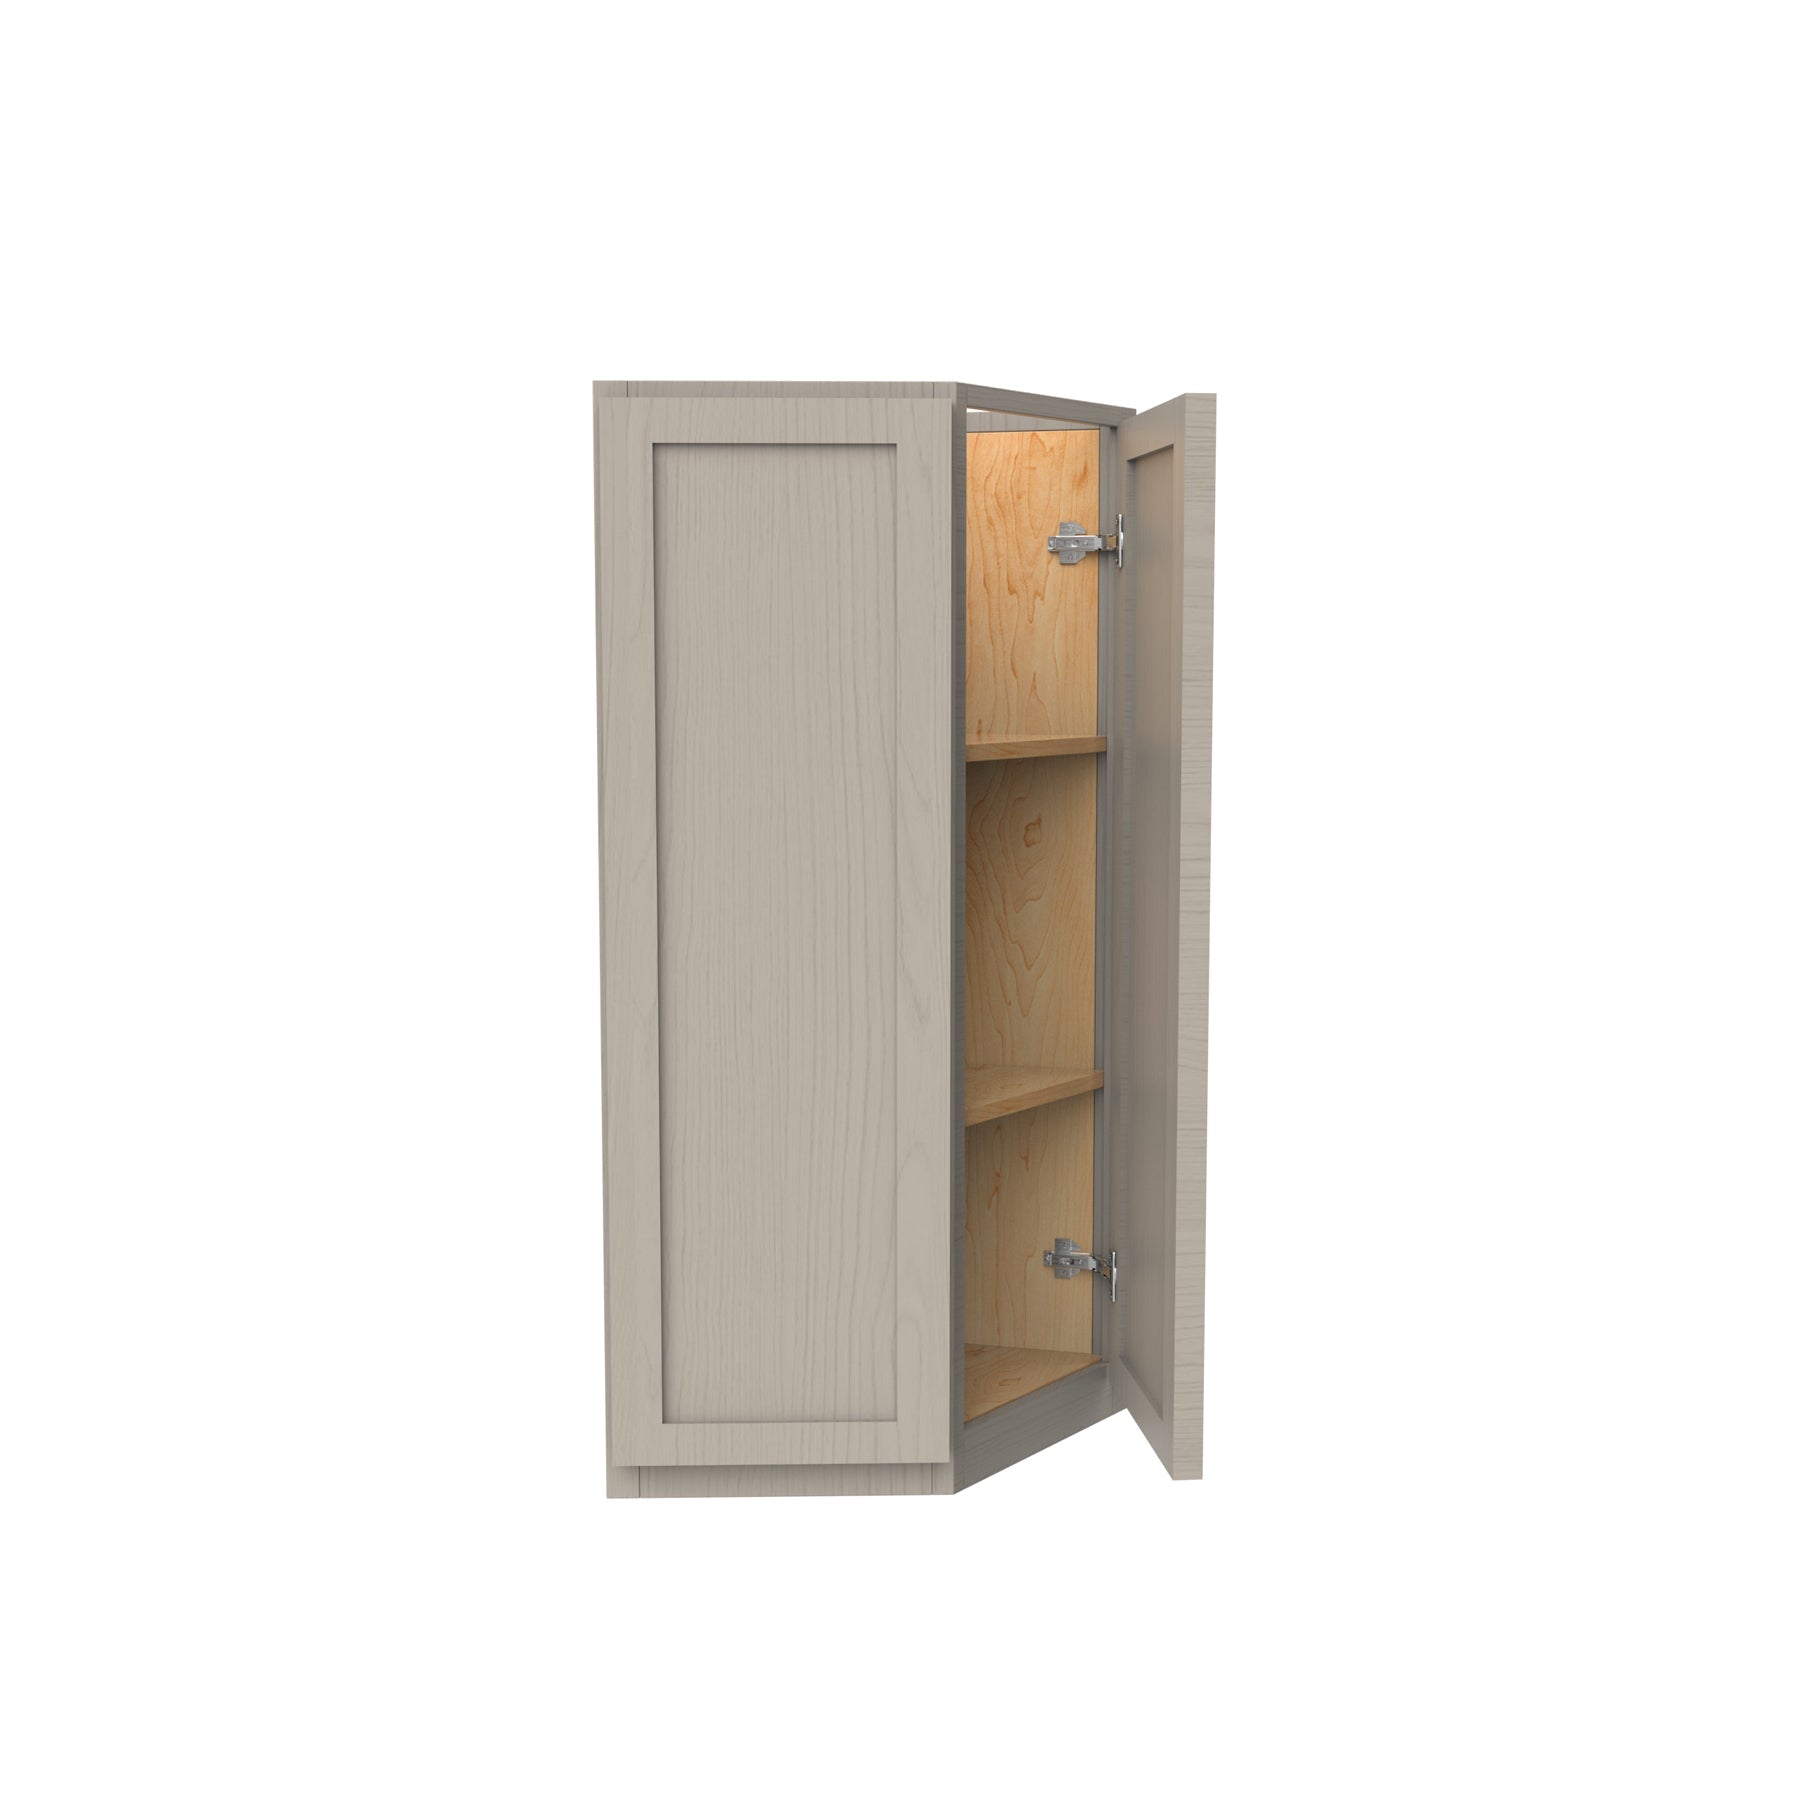 RTA - Double Door Wall End Cabinet | 12"W x 30"H x 12"D - Richmond Stone